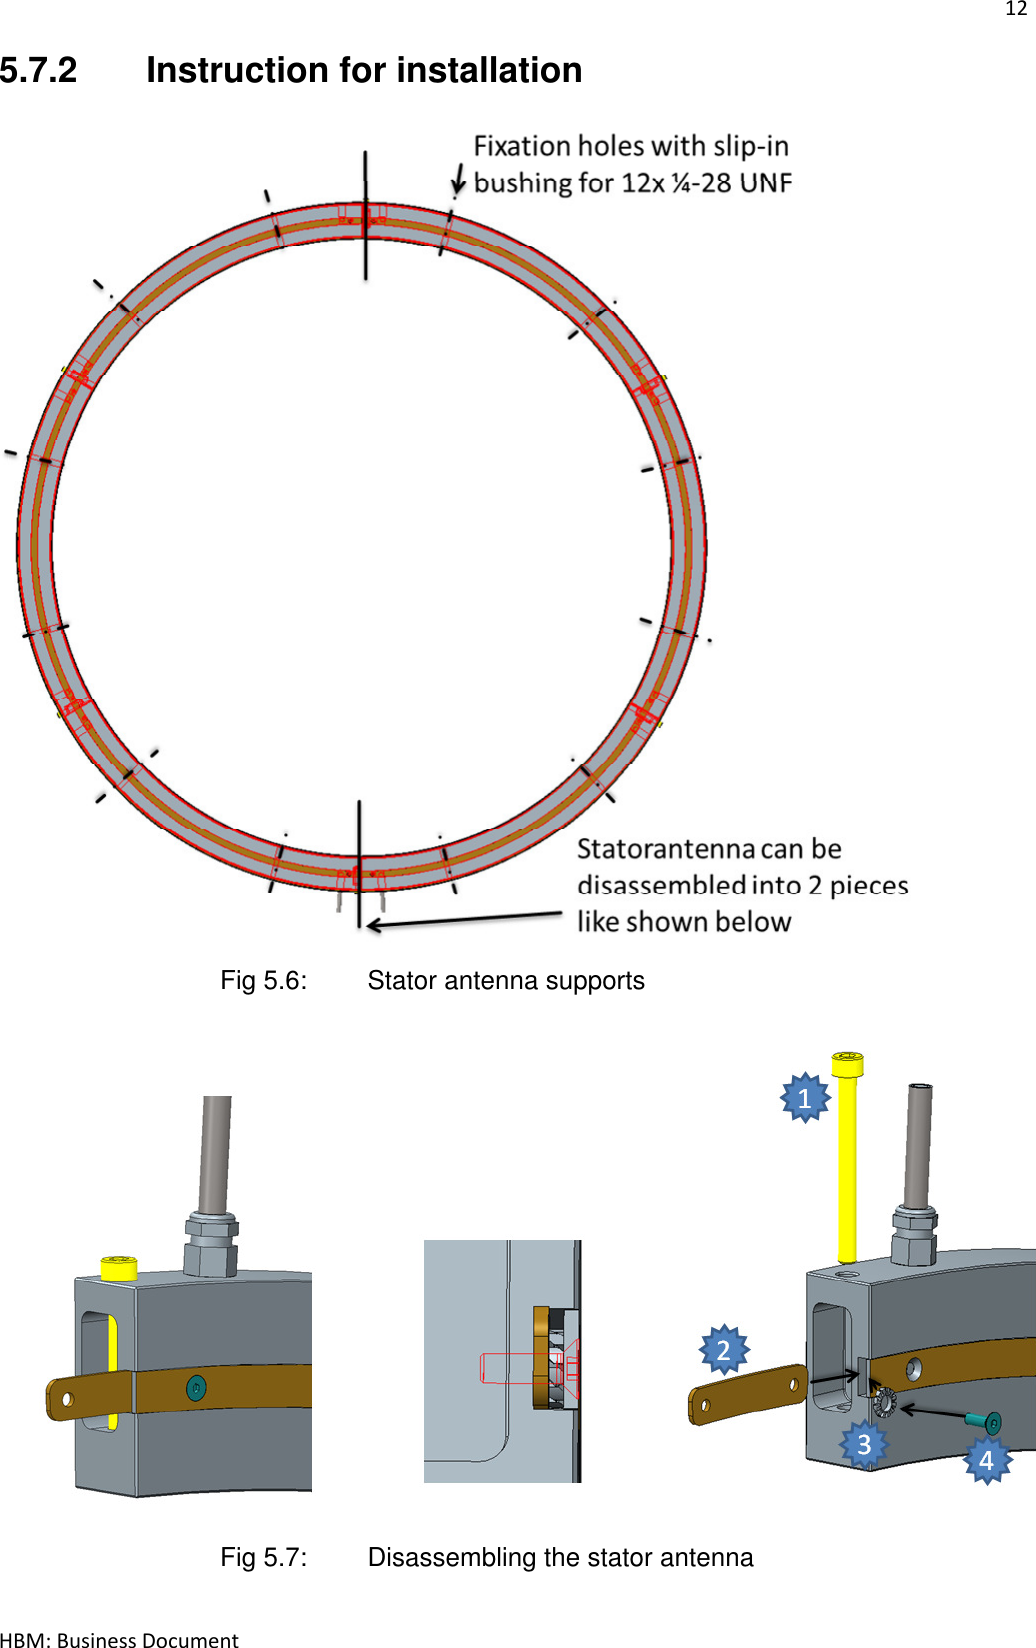 12  HBM: Business Document 5.7.2  Instruction for installation  Fig 5.6:   Stator antenna supports  Fig 5.7:   Disassembling the stator antenna   